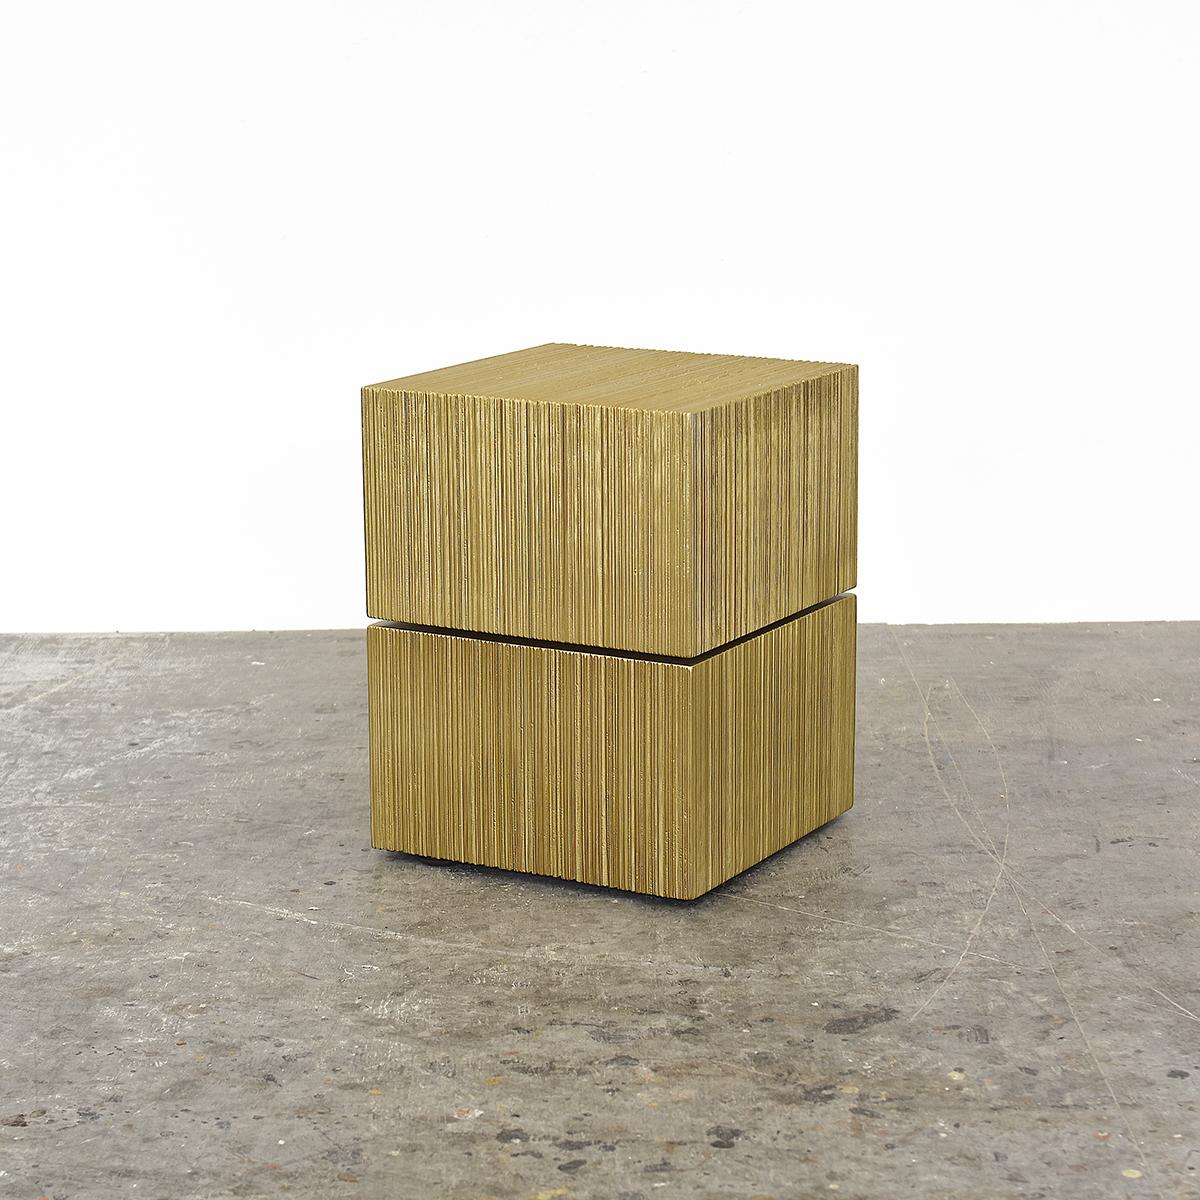 ORO - OS1 stool by John Eric Byers
ORO collection
Dimensions: 38 x 38 x 51 cm
Materials: maple hardwood + gold metallic lacquer

Hand shaped + hand textured + hollow core stacked lamination

John Eric Byers creates geometrically inspired